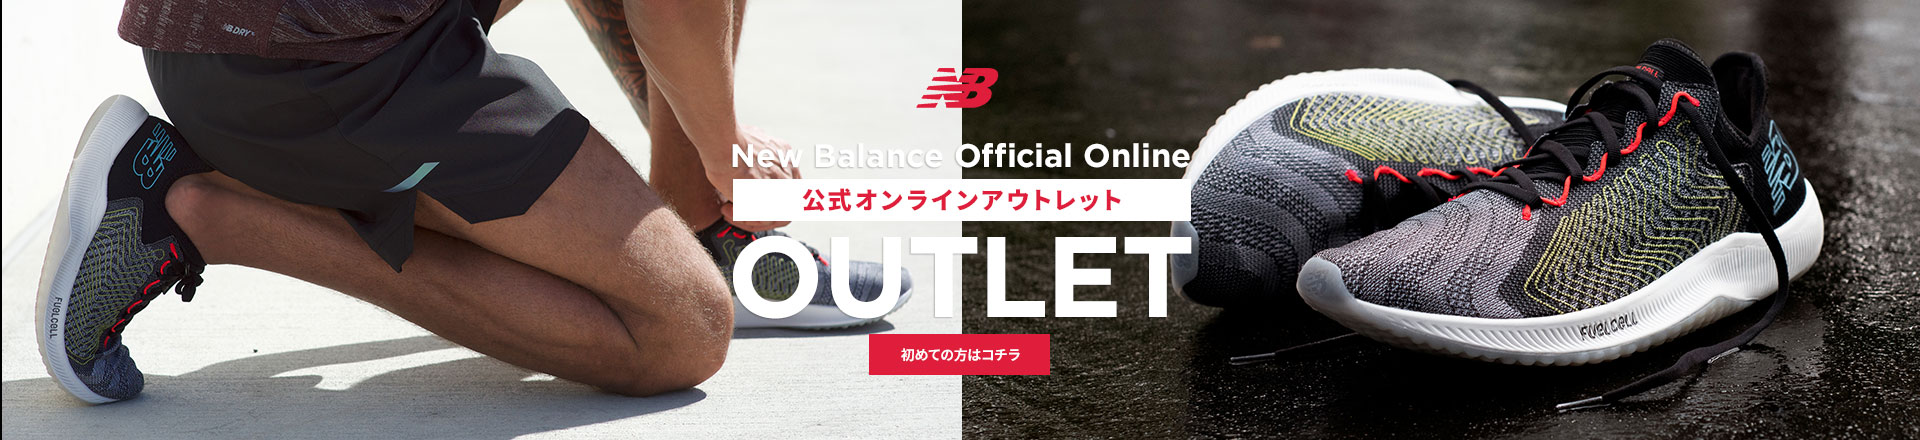 outlet online new balance